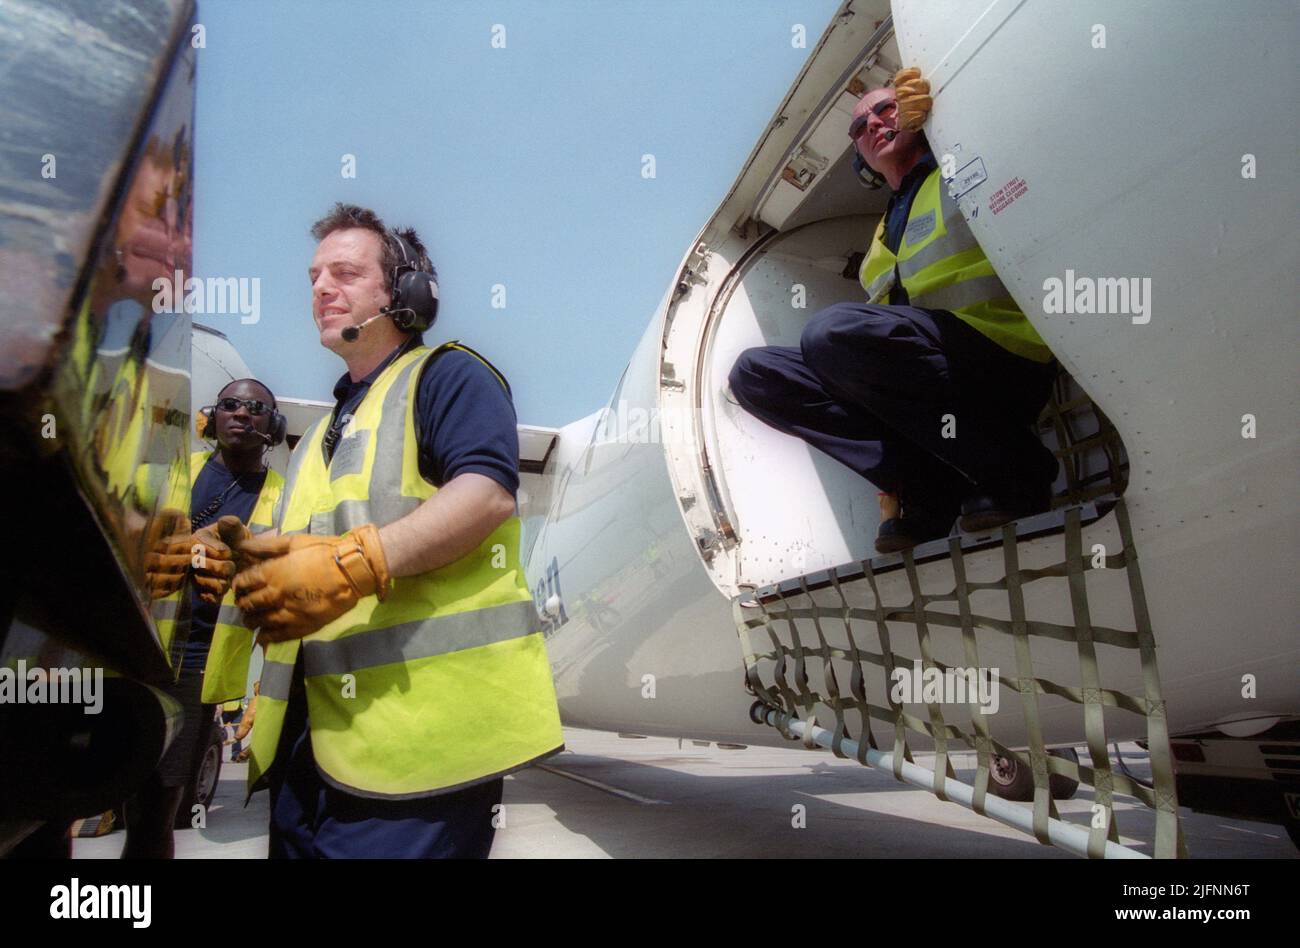 Airport luggage handlers unloading and transporting airline passengers luggage at an airport Stock Photo